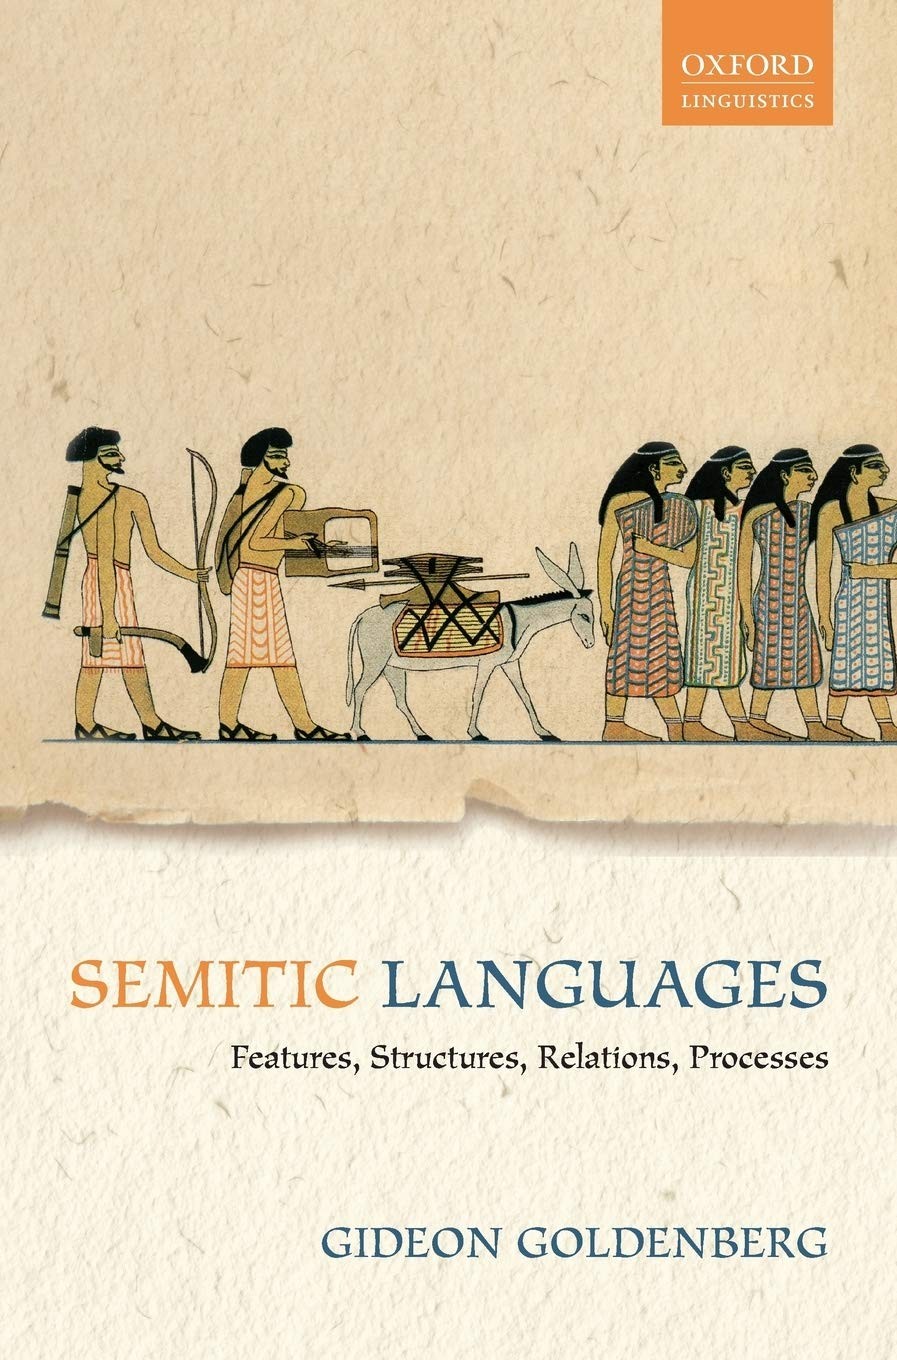 Semitic Languages: Features, Structures, Relations, Processes